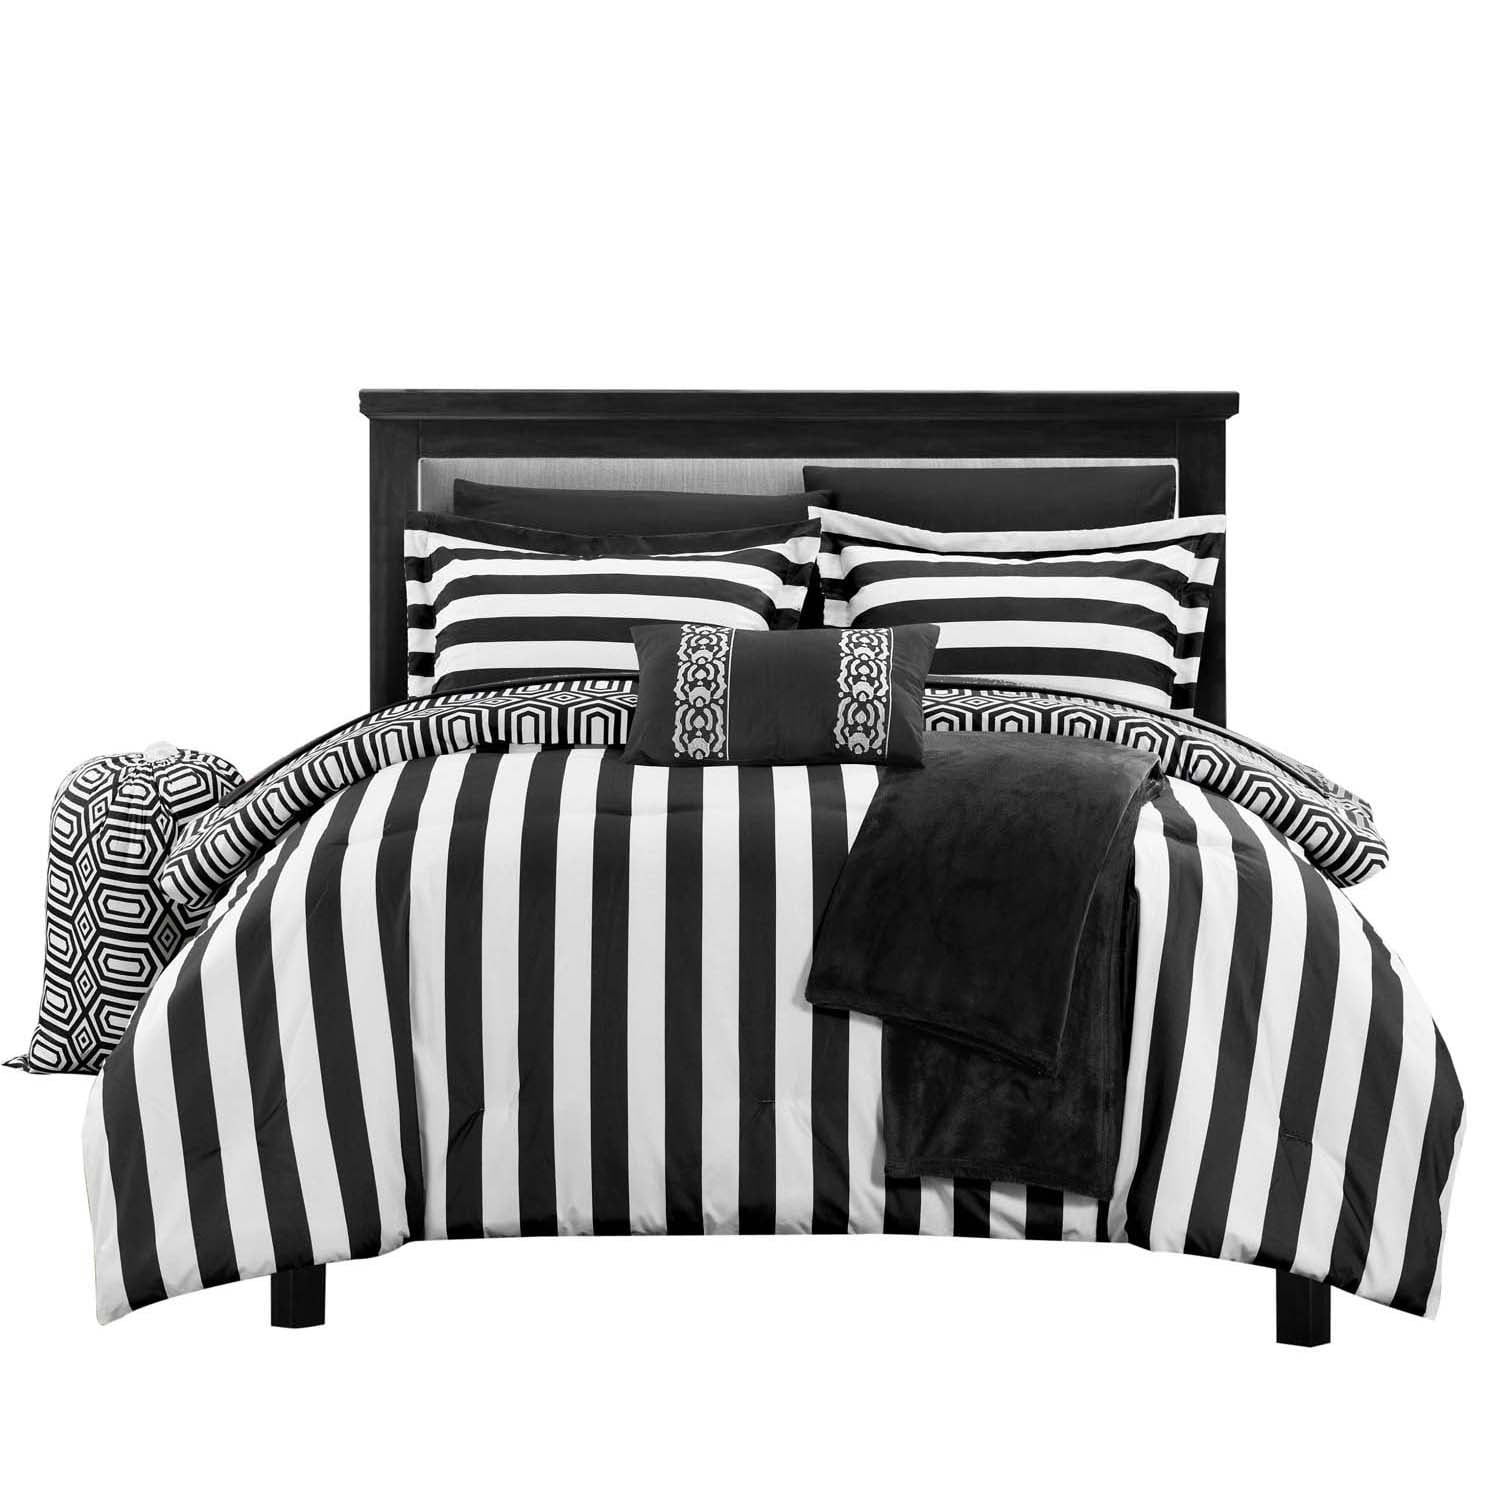 White And Black Striped Comforter / Find quality comforters exclusively ...